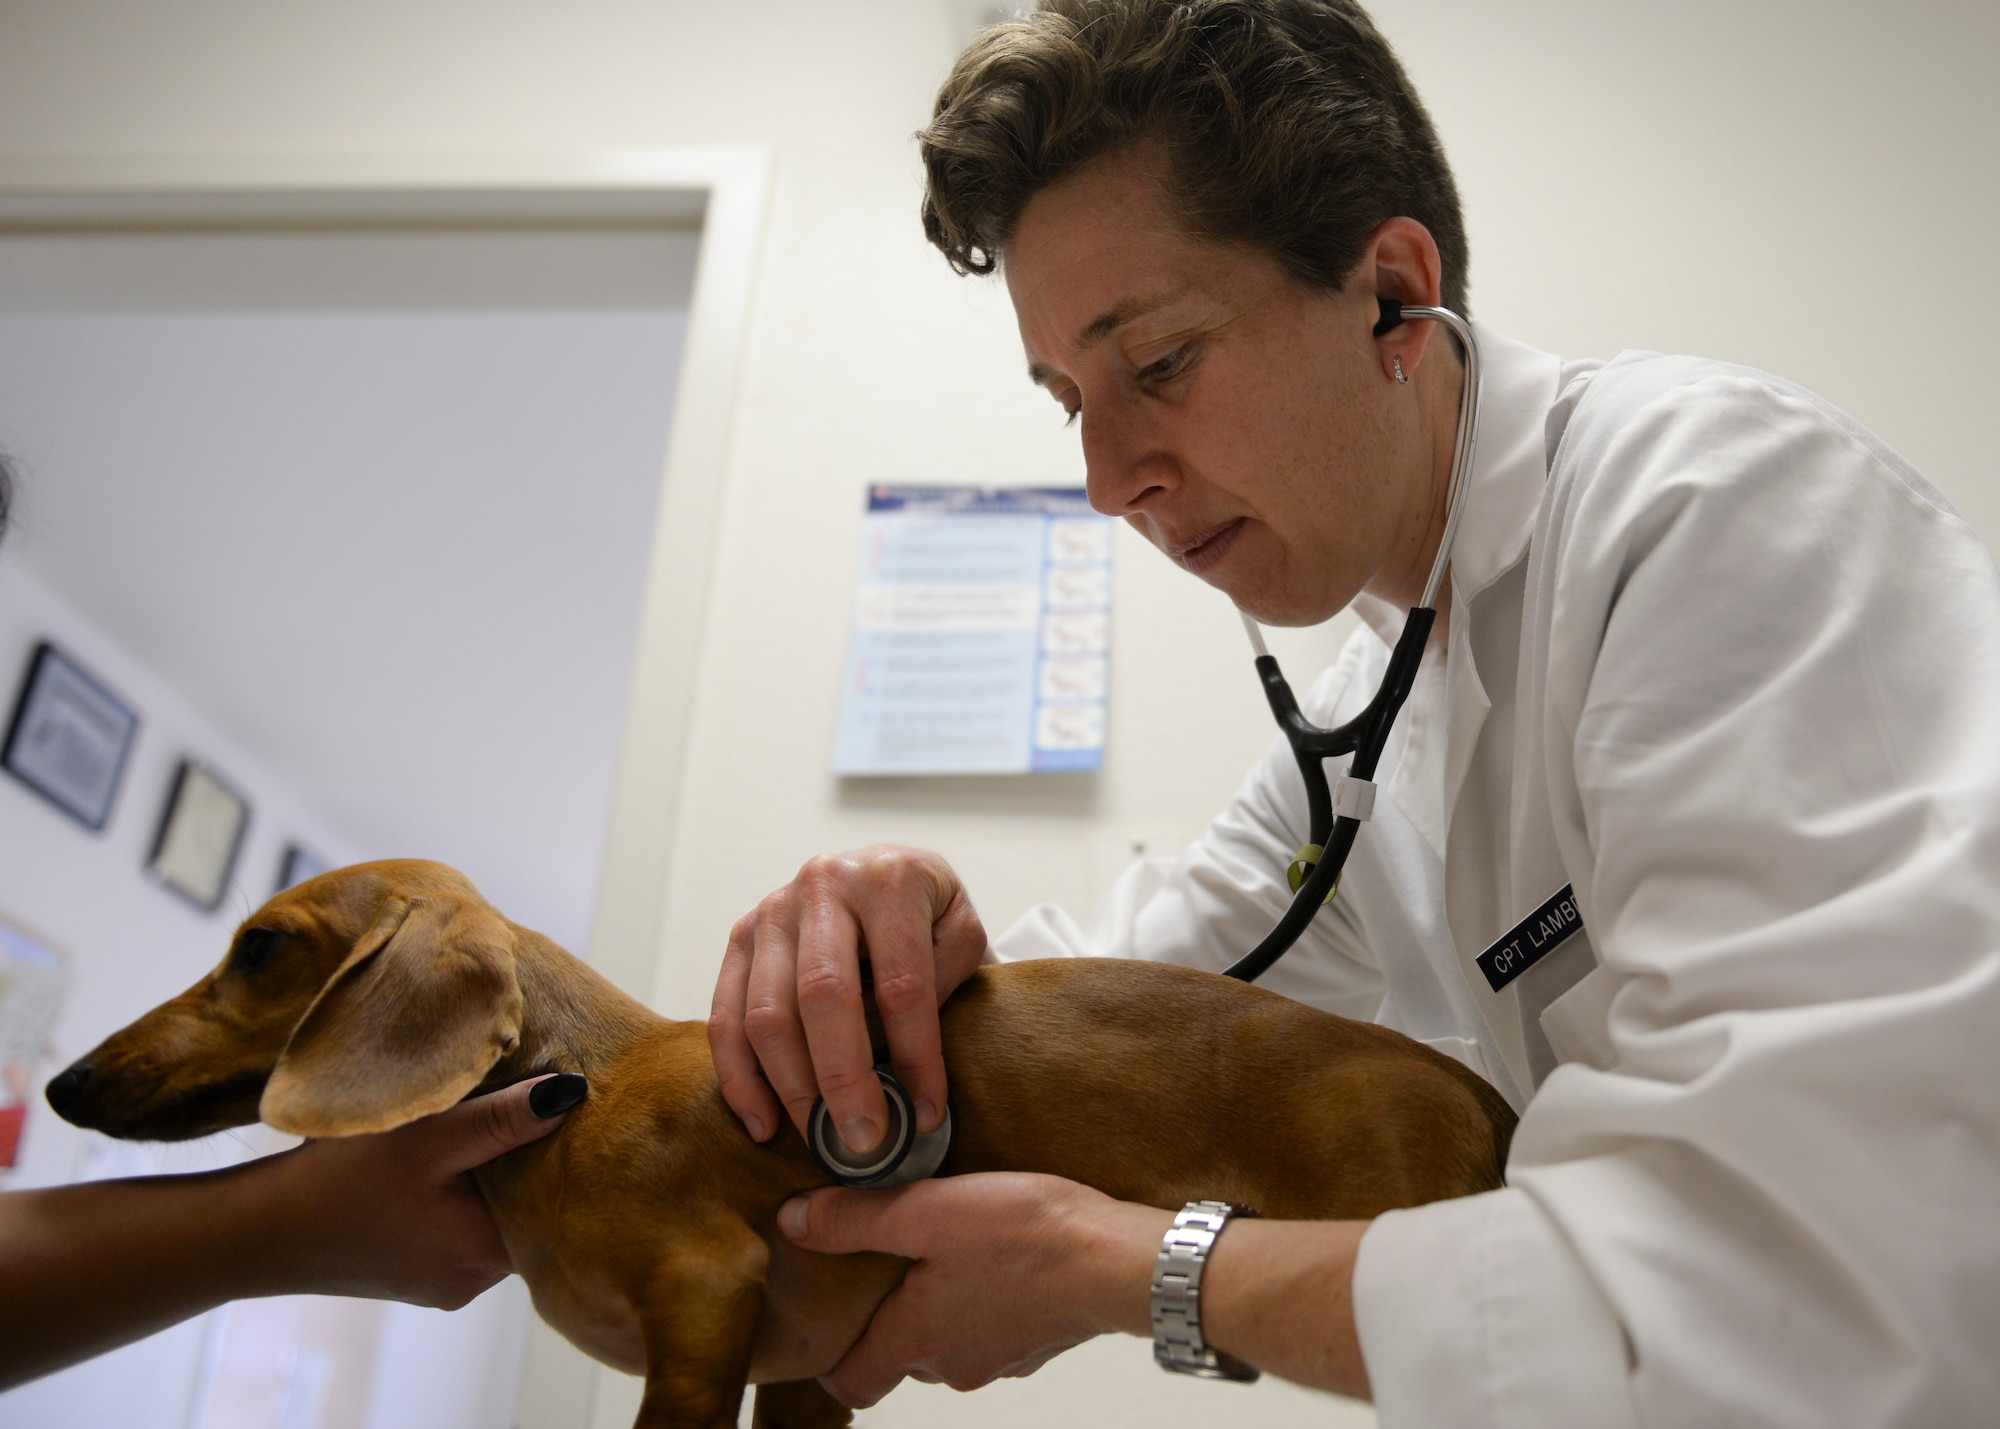 Capt. Katherine Lambden, officer in charge of the Holloman Veterinary Treatment Facility, listens to Cash’s, a 5-month-old Dachshund, heartbeat during a check-up at Holloman Air Force Base, N.M. Oct 1. Lambden attended a 10-month First Year Graduate Veterinary Education internship at Fort Campbell, Kentucky. Lambden has such a positive outlook on the future of the clinic. With an amazing staff and the wonderful pets and owners, Lambden feels like part of the Holloman commu-nity. (U.S. Air Force photo by Staff Sgt. E’Lysia A. Wray/Released)